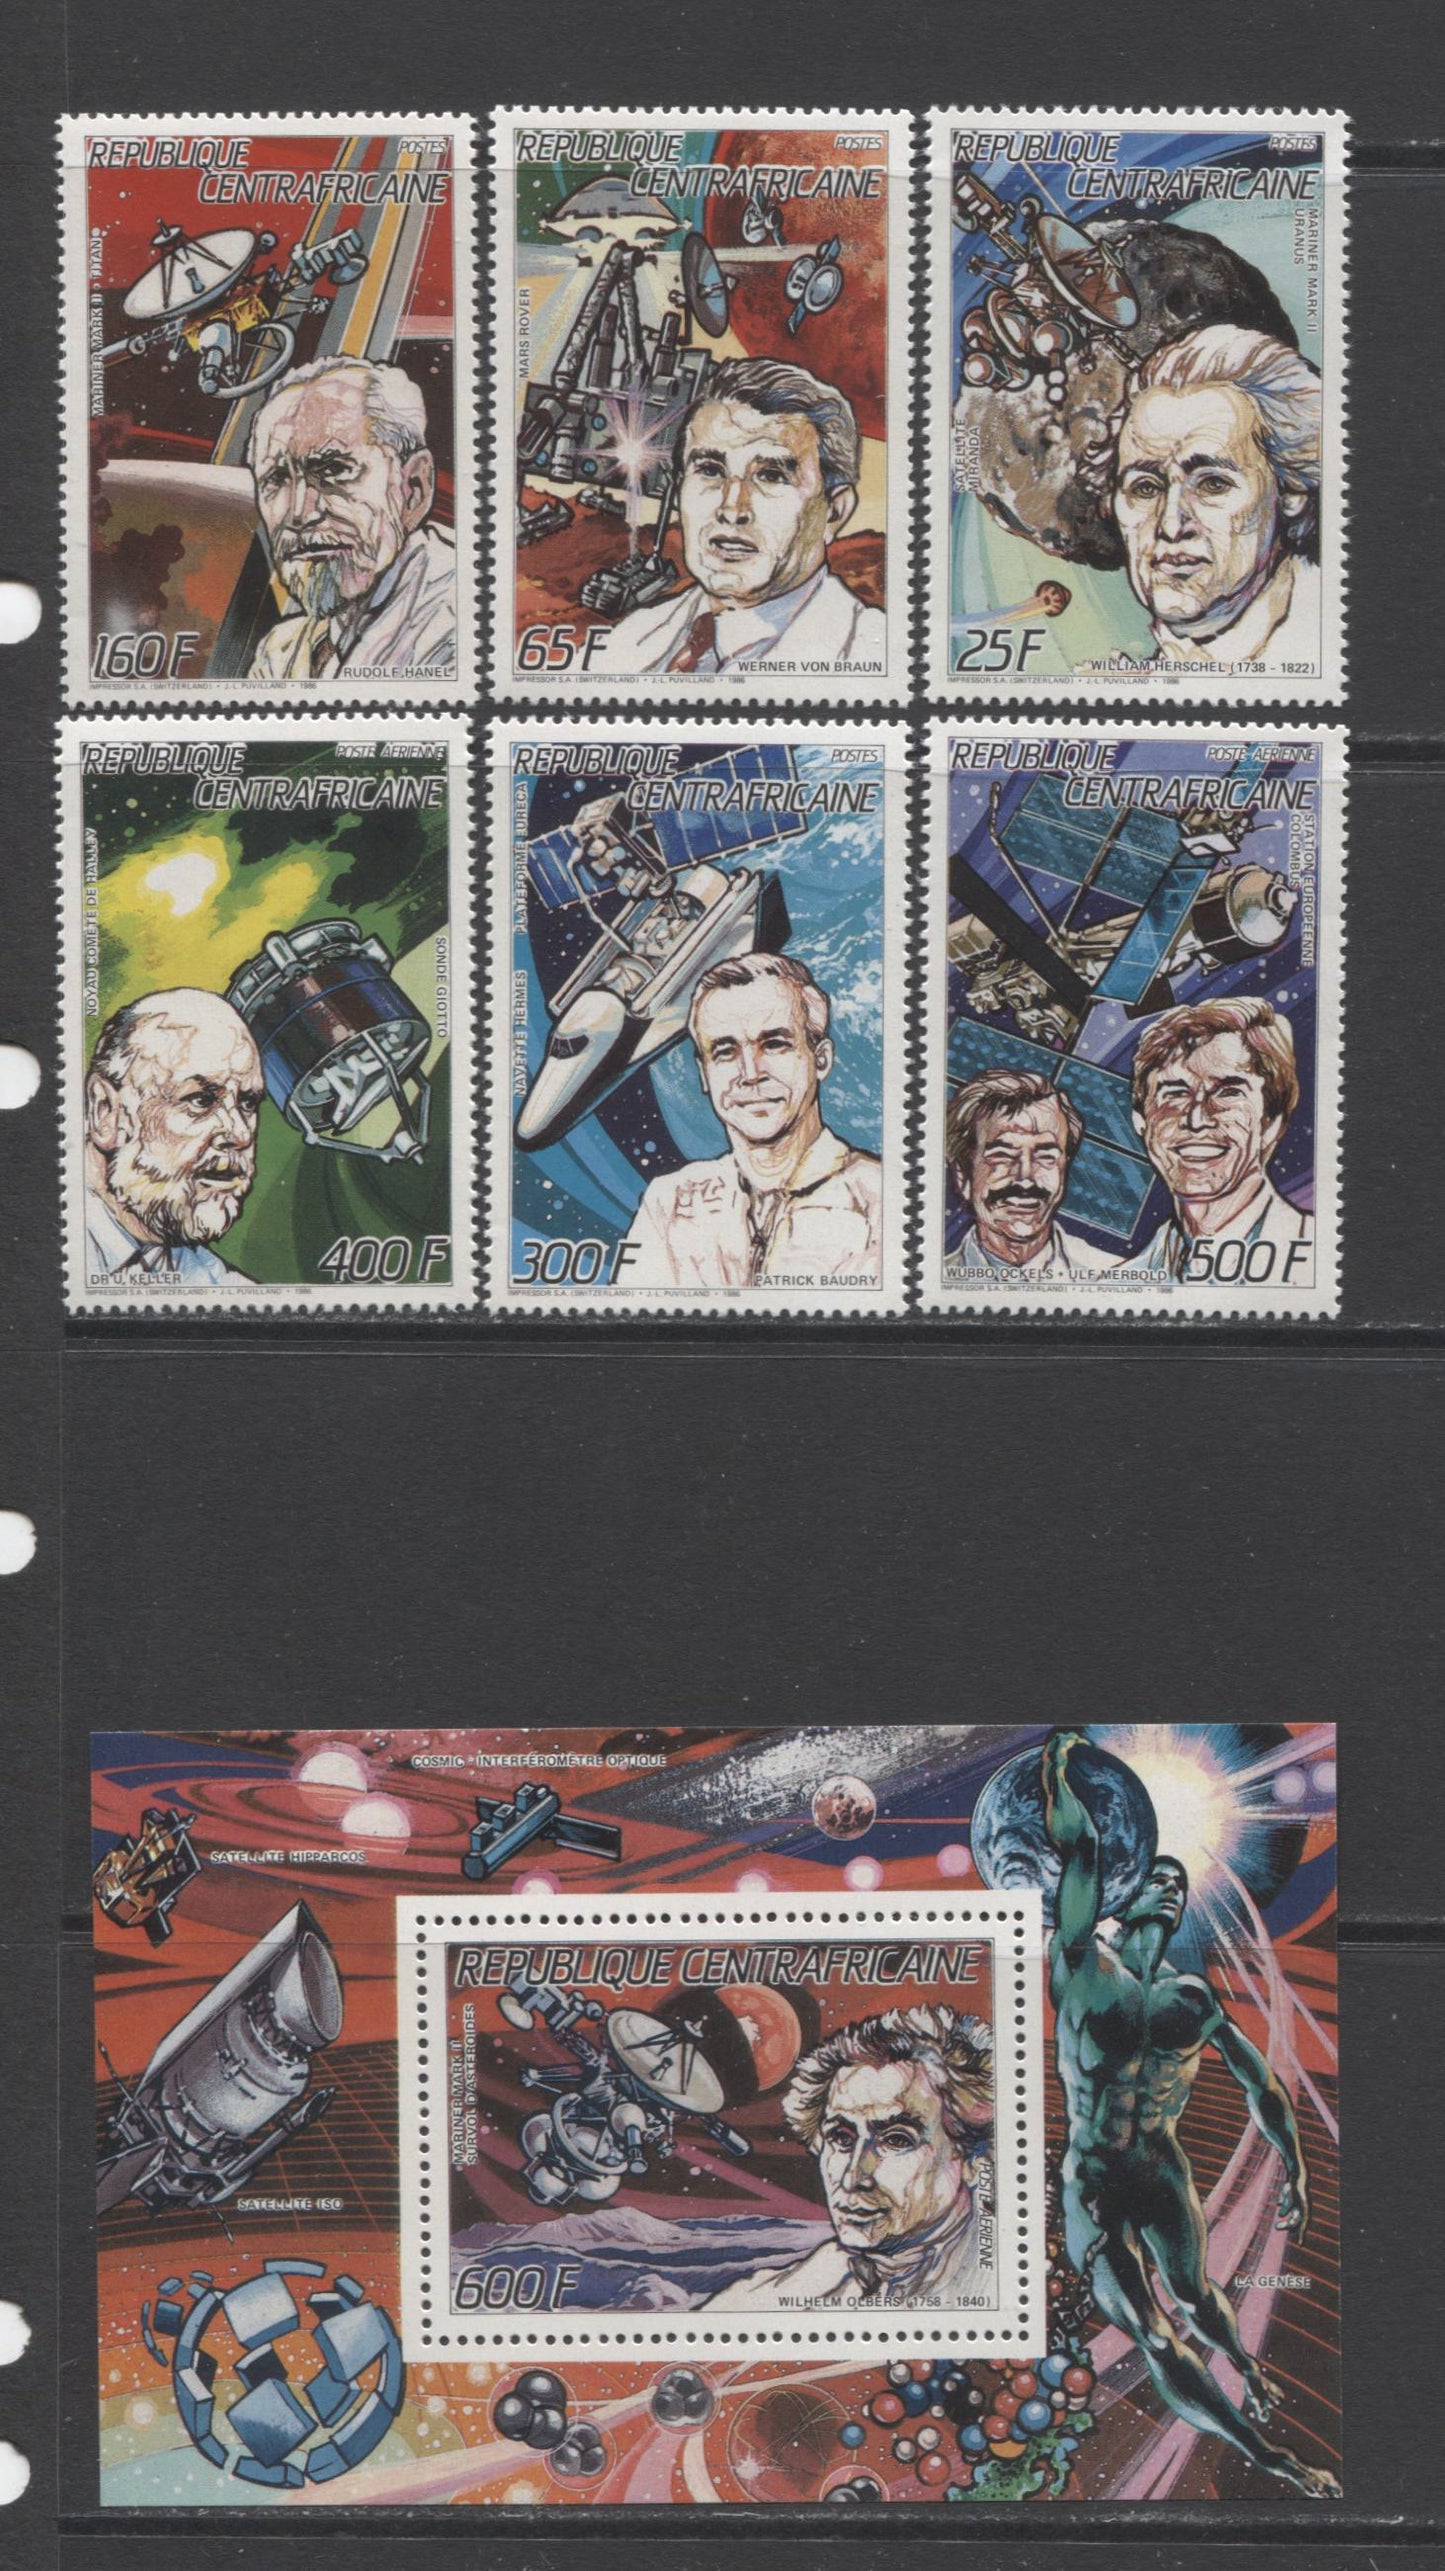 Lot 73 Central African Republic SC#844-850 1986 Scientists and Inventions Issue, A VFNH Range Of Singles & Unlisted Souvenir Sheet, 2017 Scott Cat. $32.45 USD, Click on Listing to See ALL Pictures